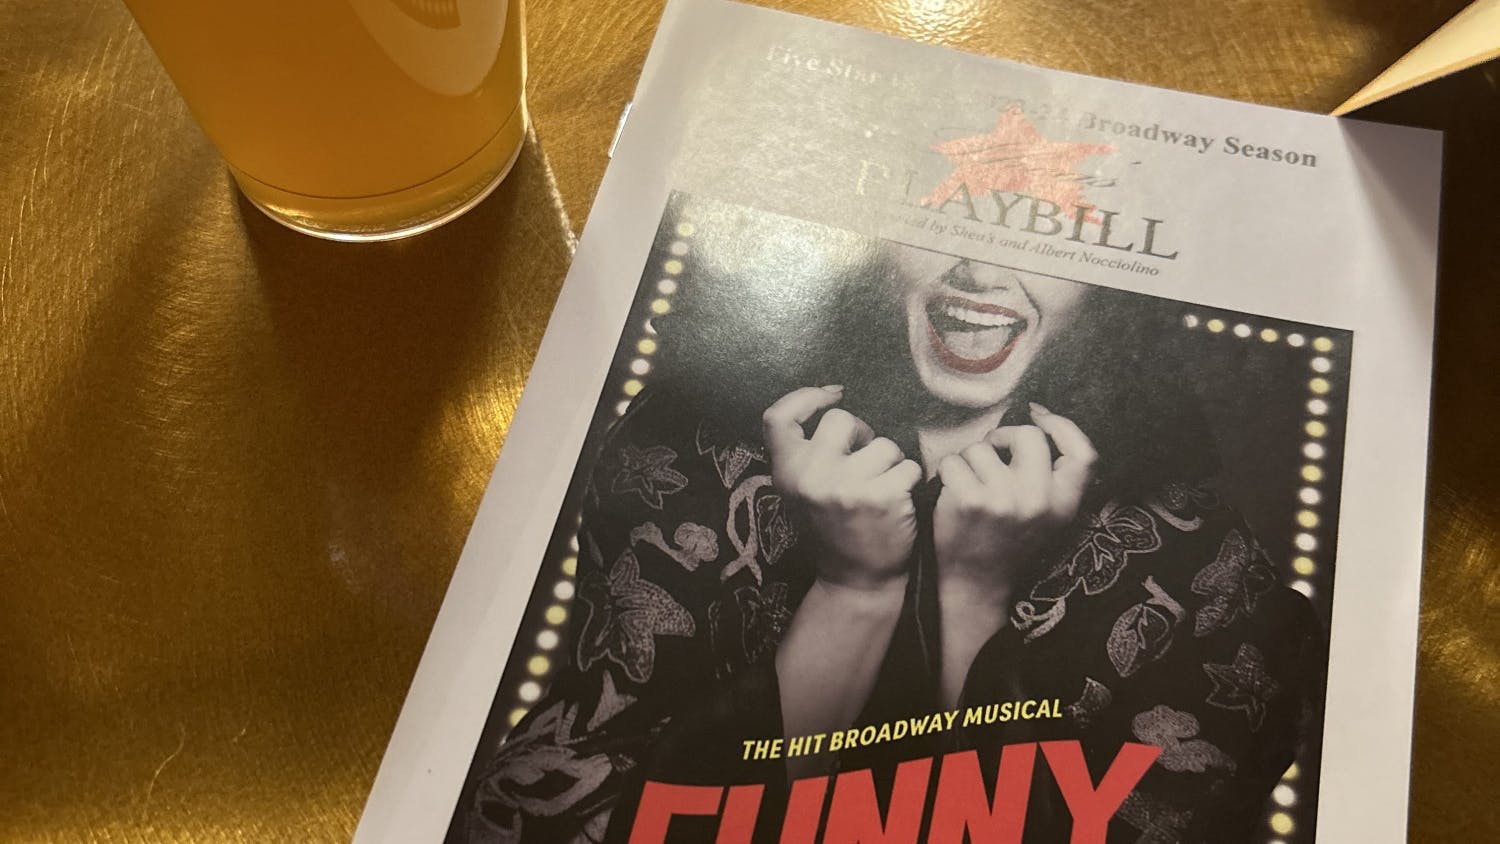 Funny Girl was at Shea's from Feb. 13-18.